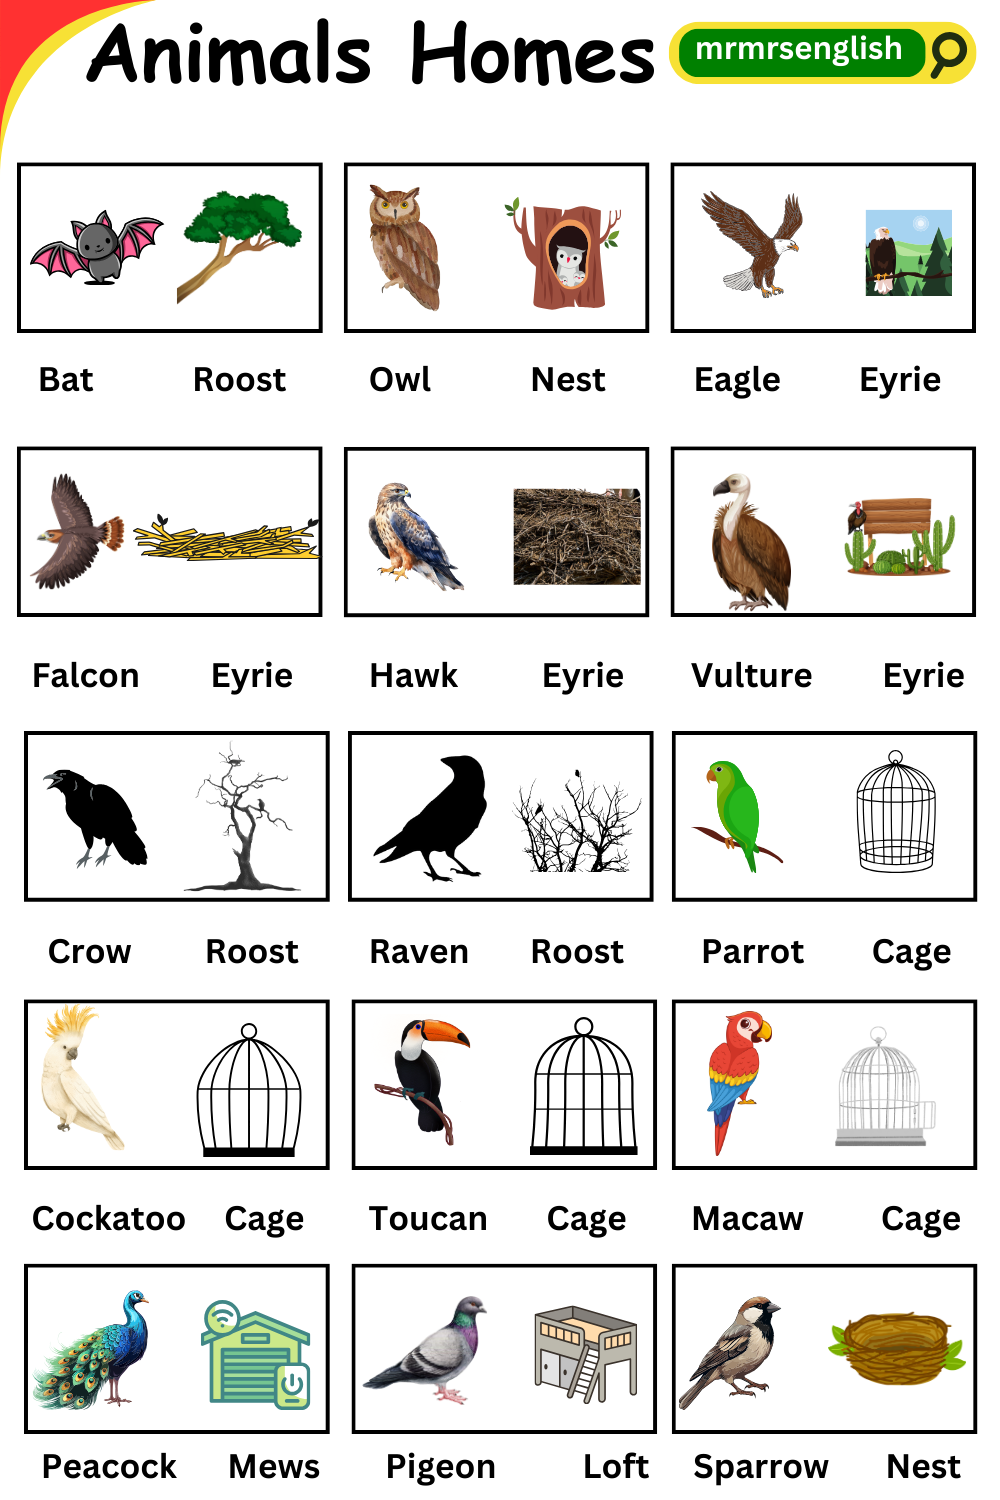 Homes of Animals names in English